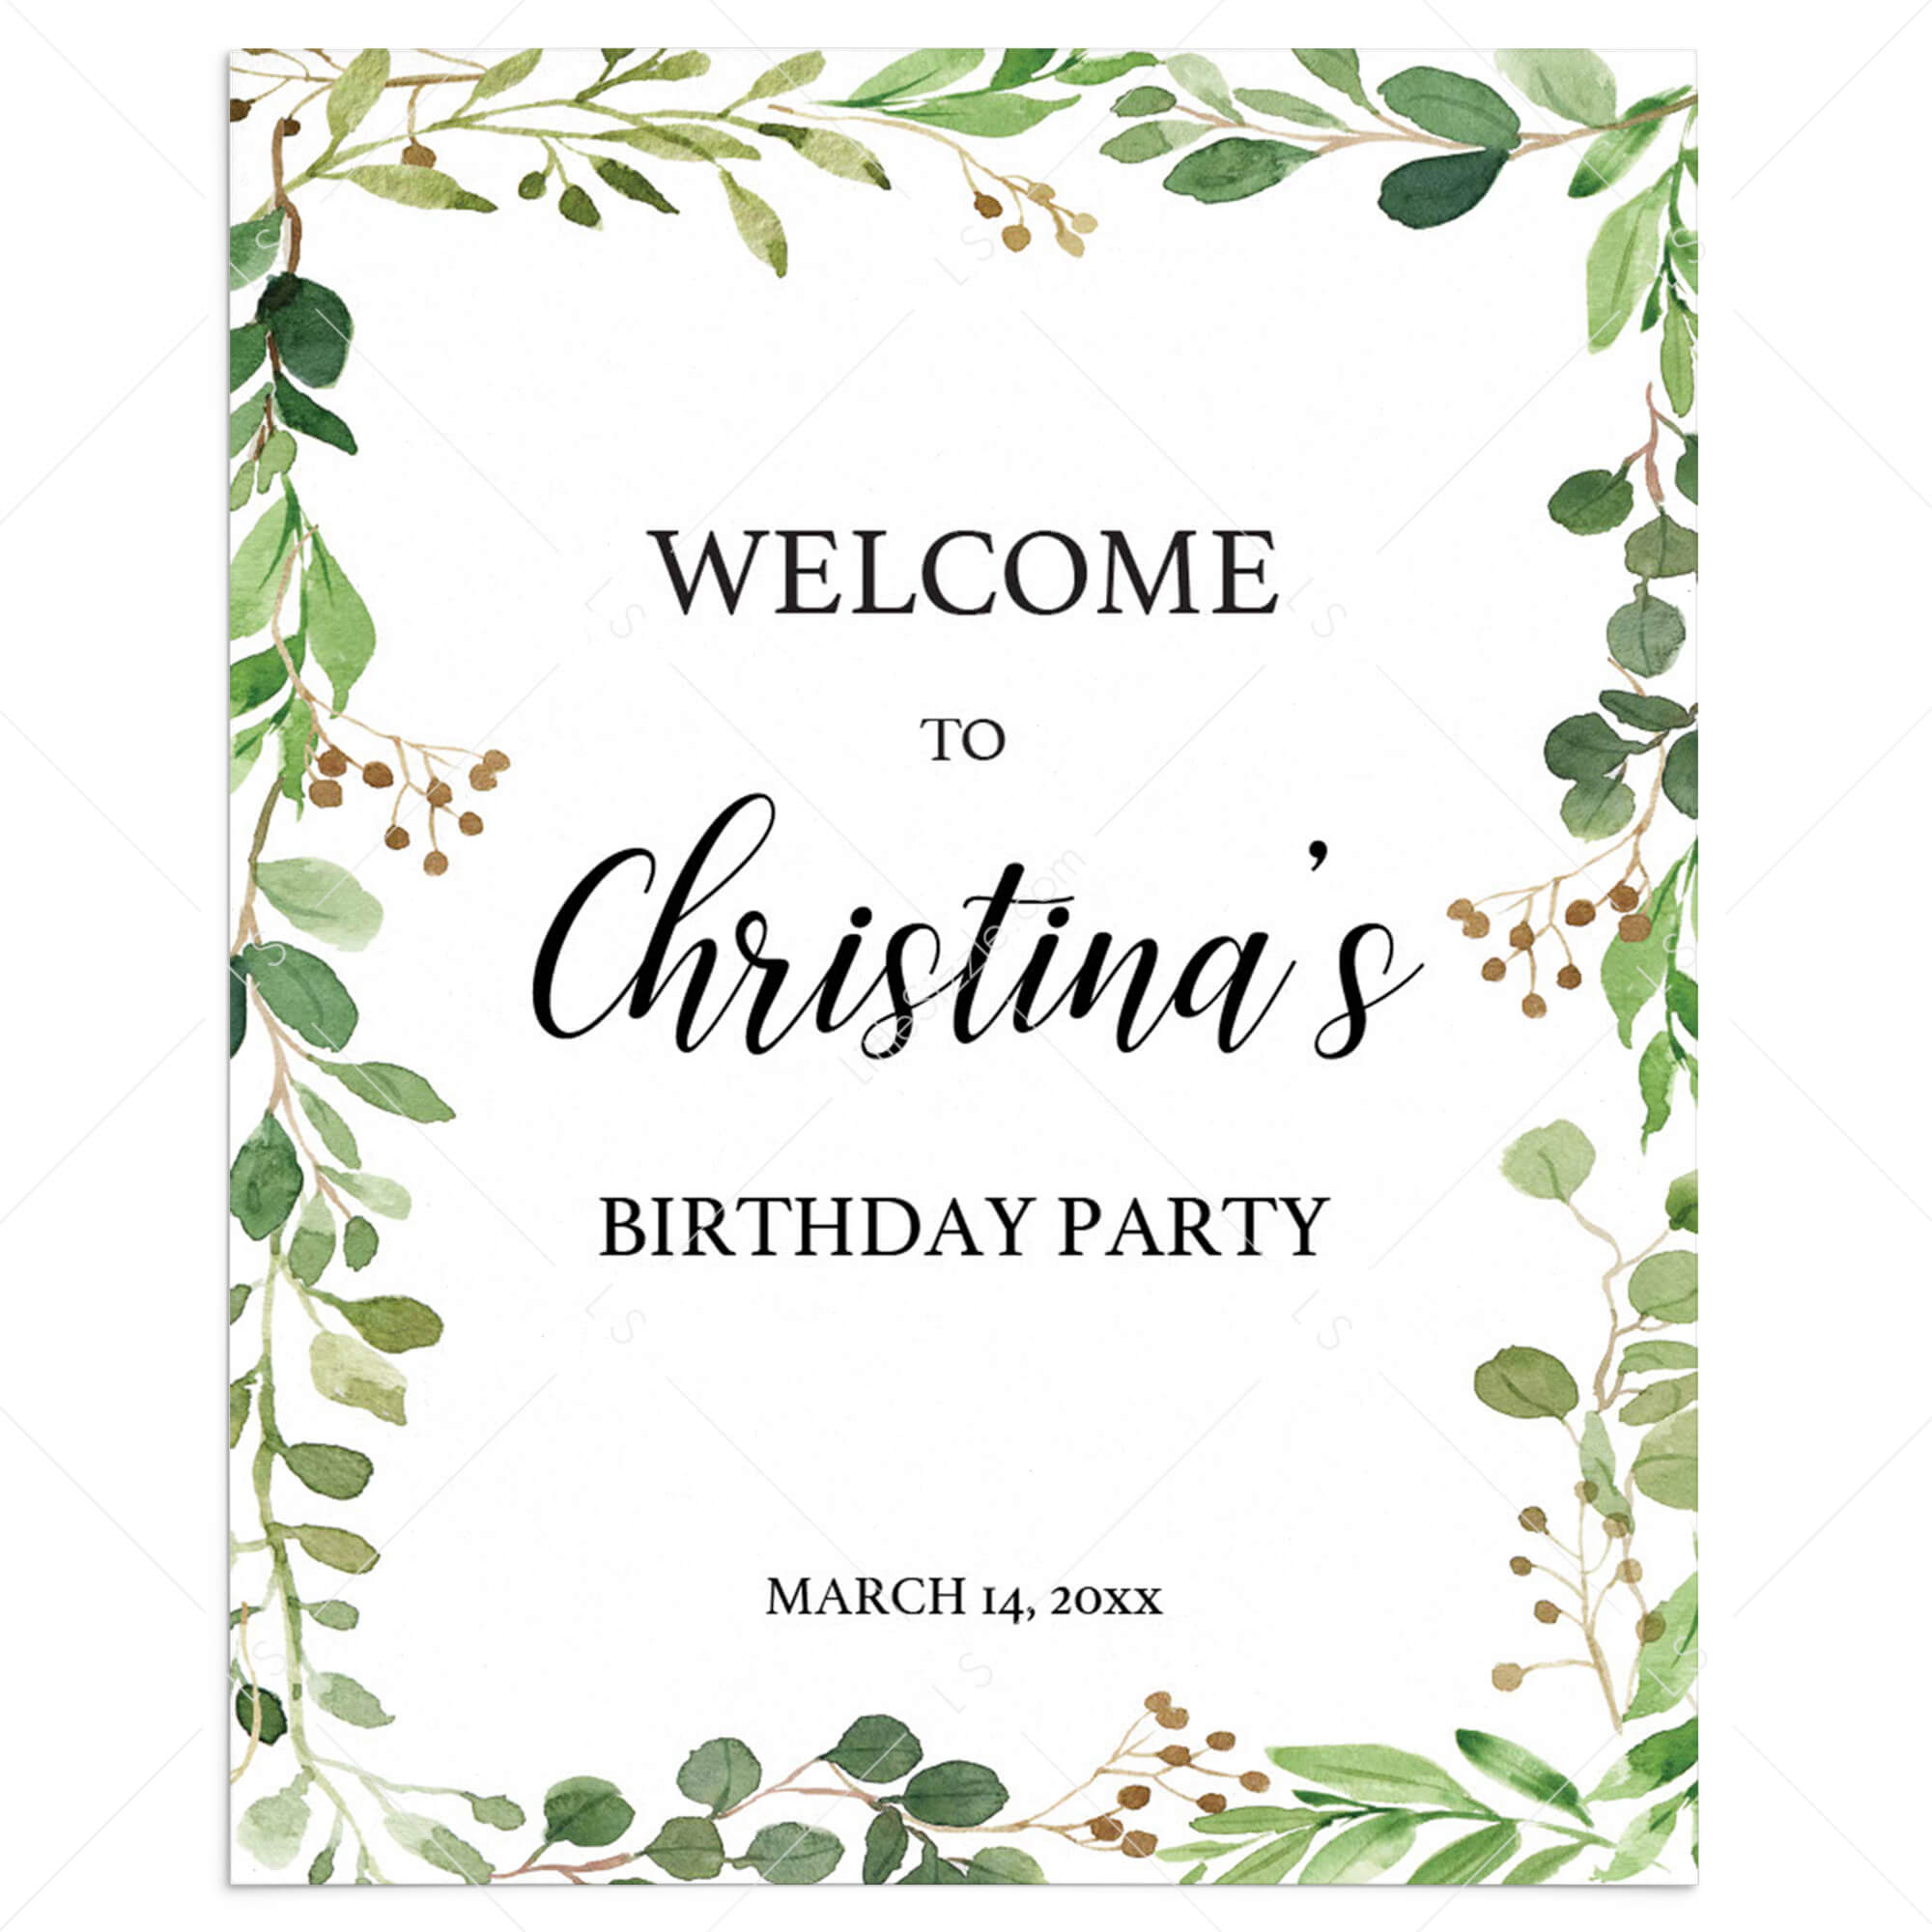 Greenery Leaves Party Welcome Board Template by LittleSizzle